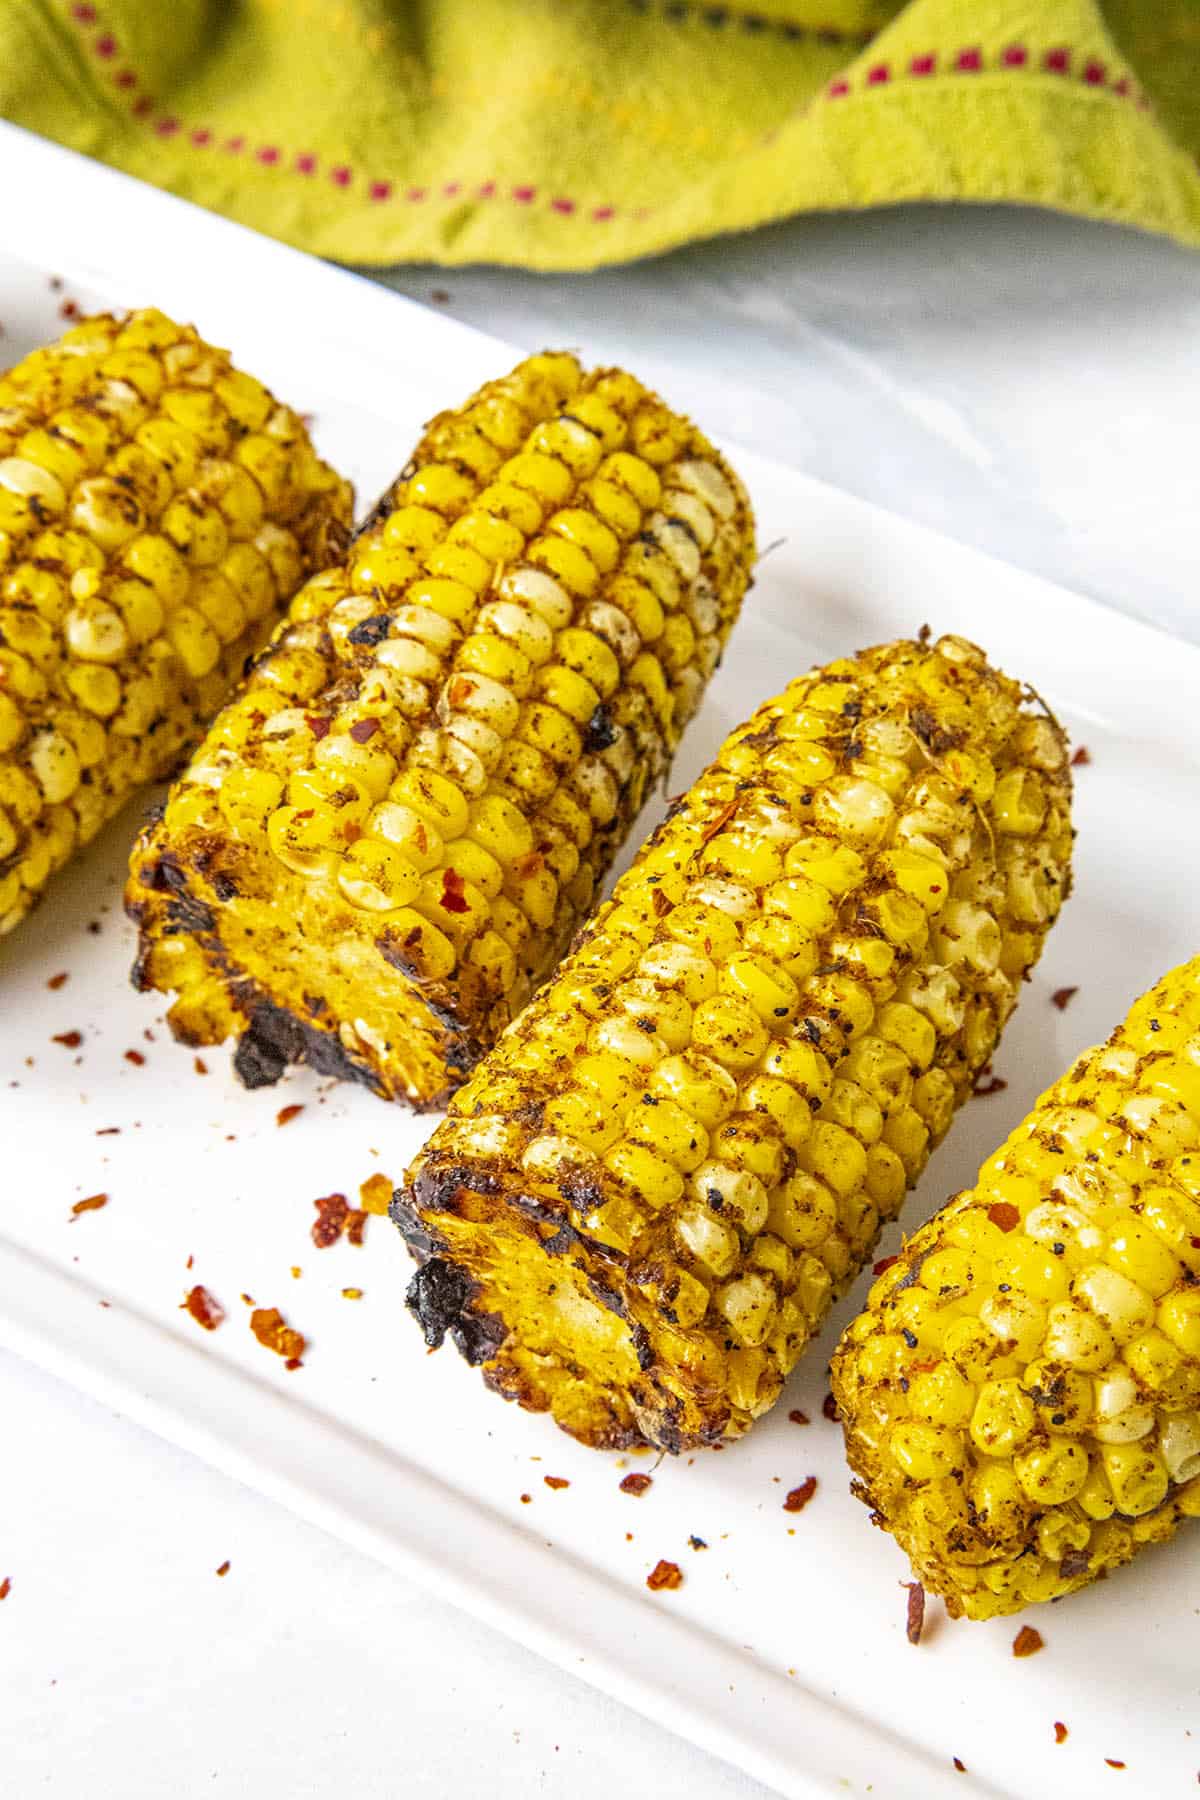 Jerk Rubbed Grilled Corn On The Cob Chili Pepper Madness,Hypoestes